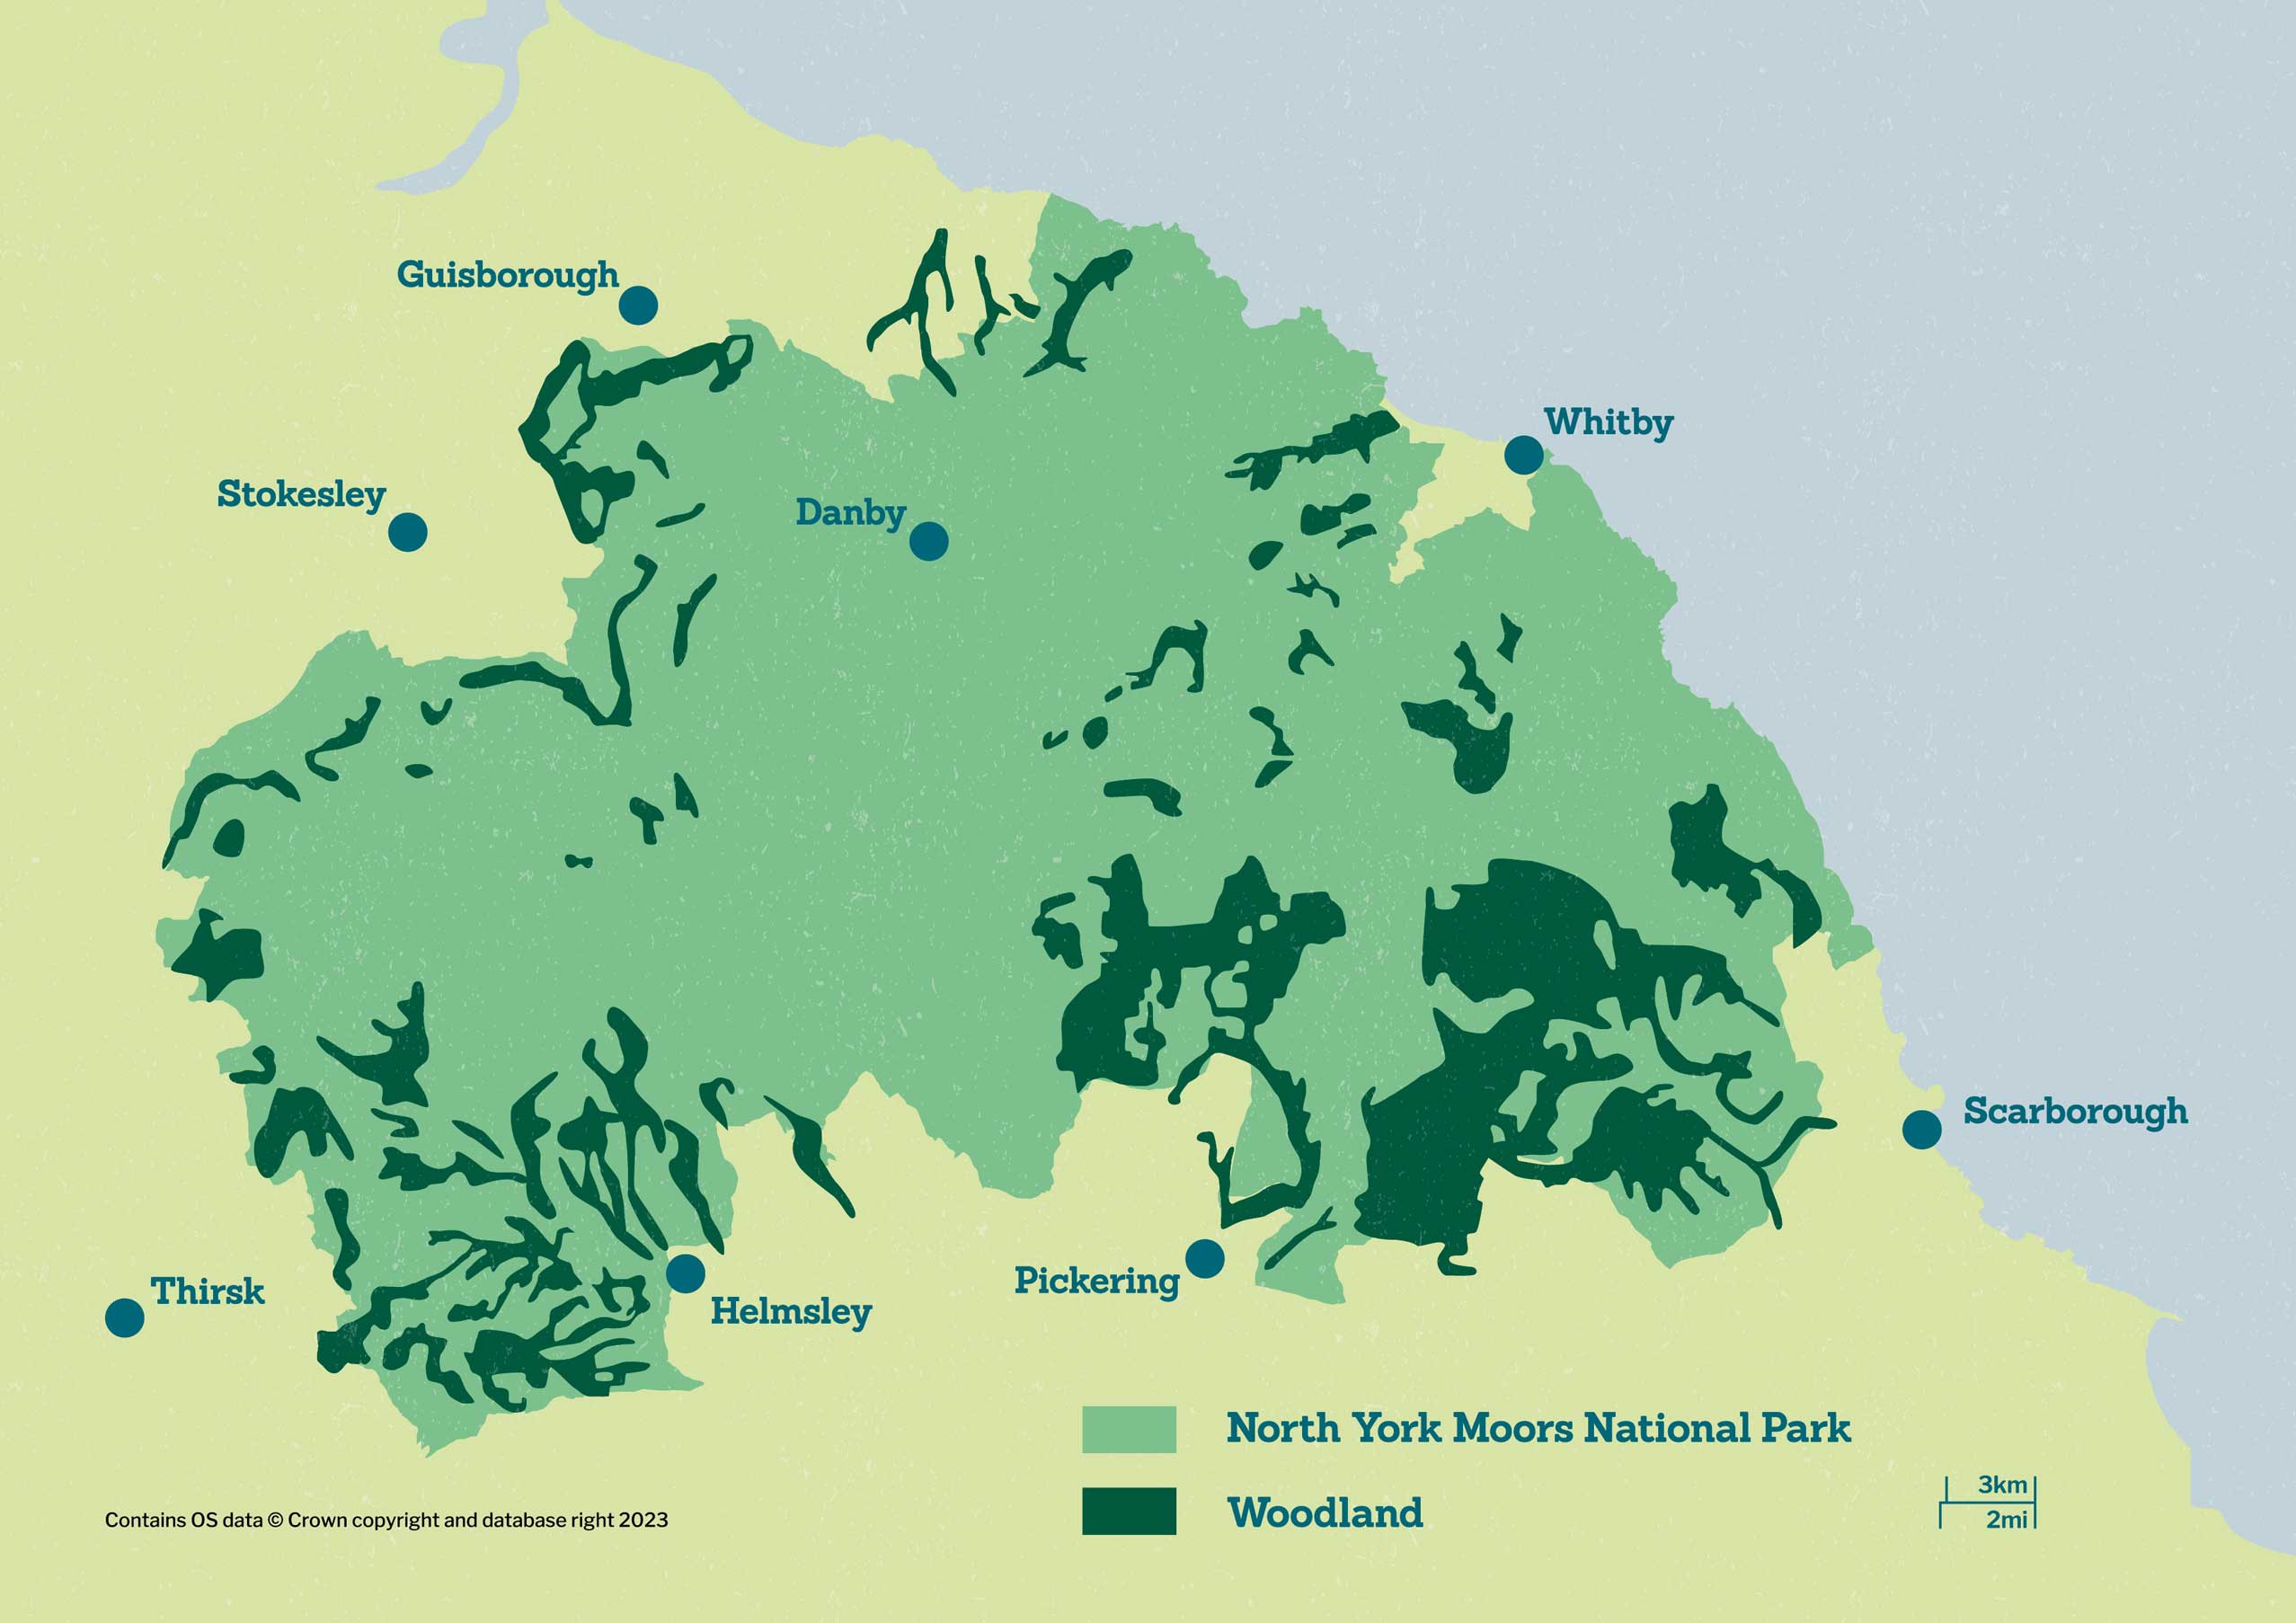 Graphical map showing woodland cover across the North York Moors National Park